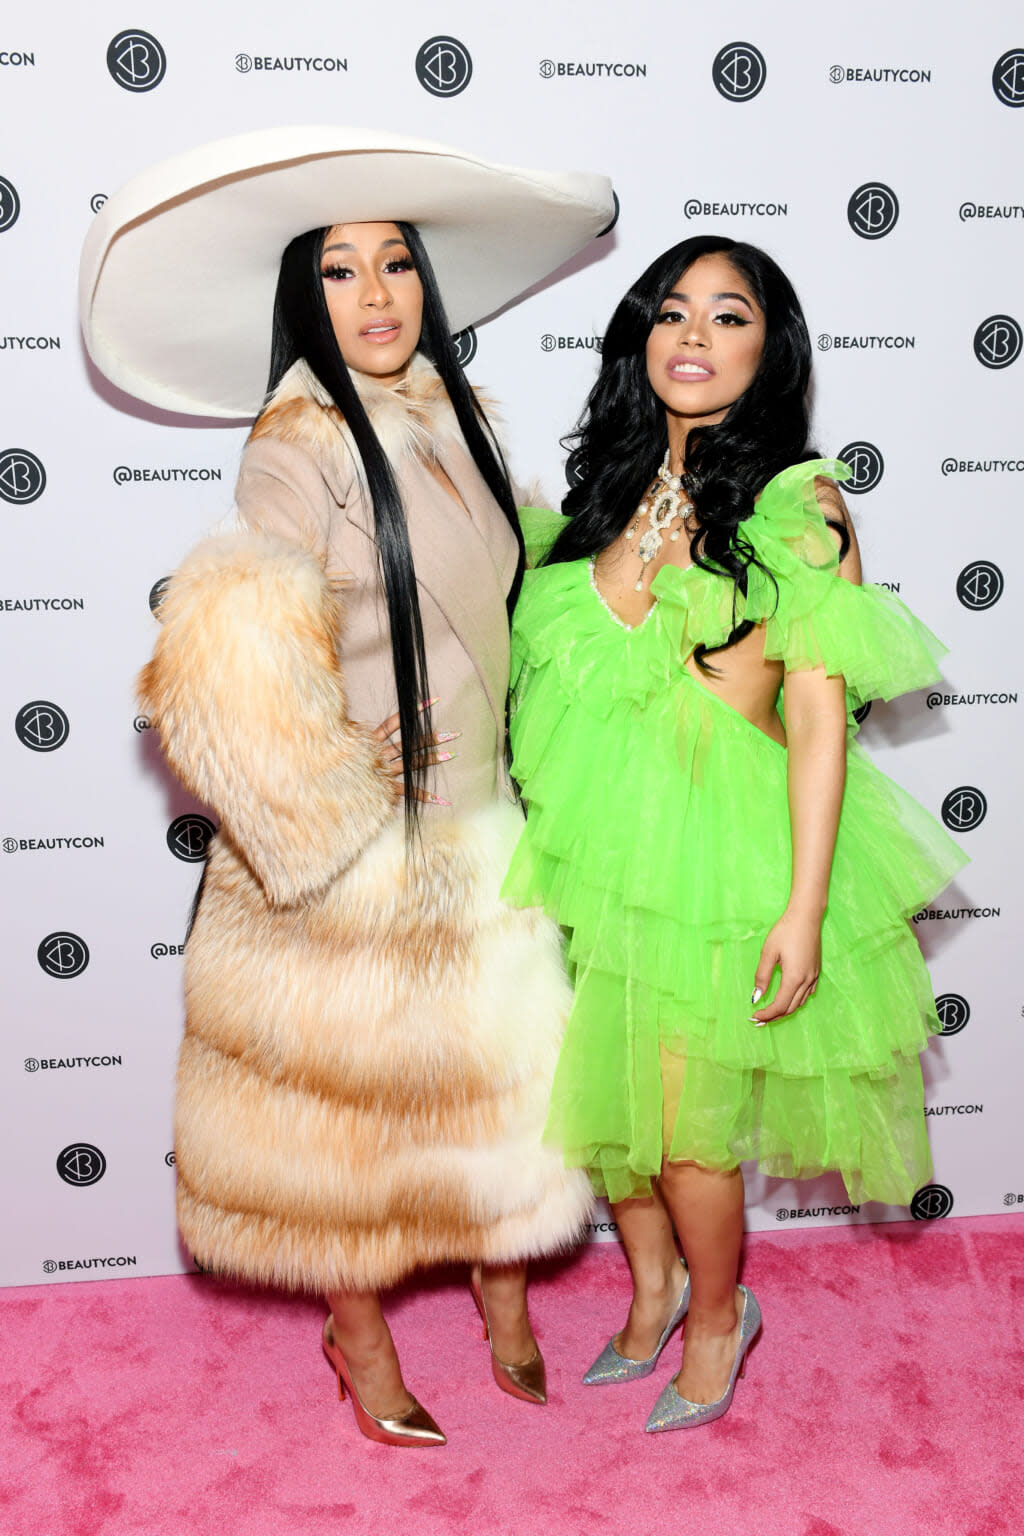 Cardi B and Hennessy Carolina attend Beautycon Festival New York 2019 at Jacob Javits Center on April 07, 2019 in New York City. (Photo by Noam Galai/Getty Images for Beautycon)